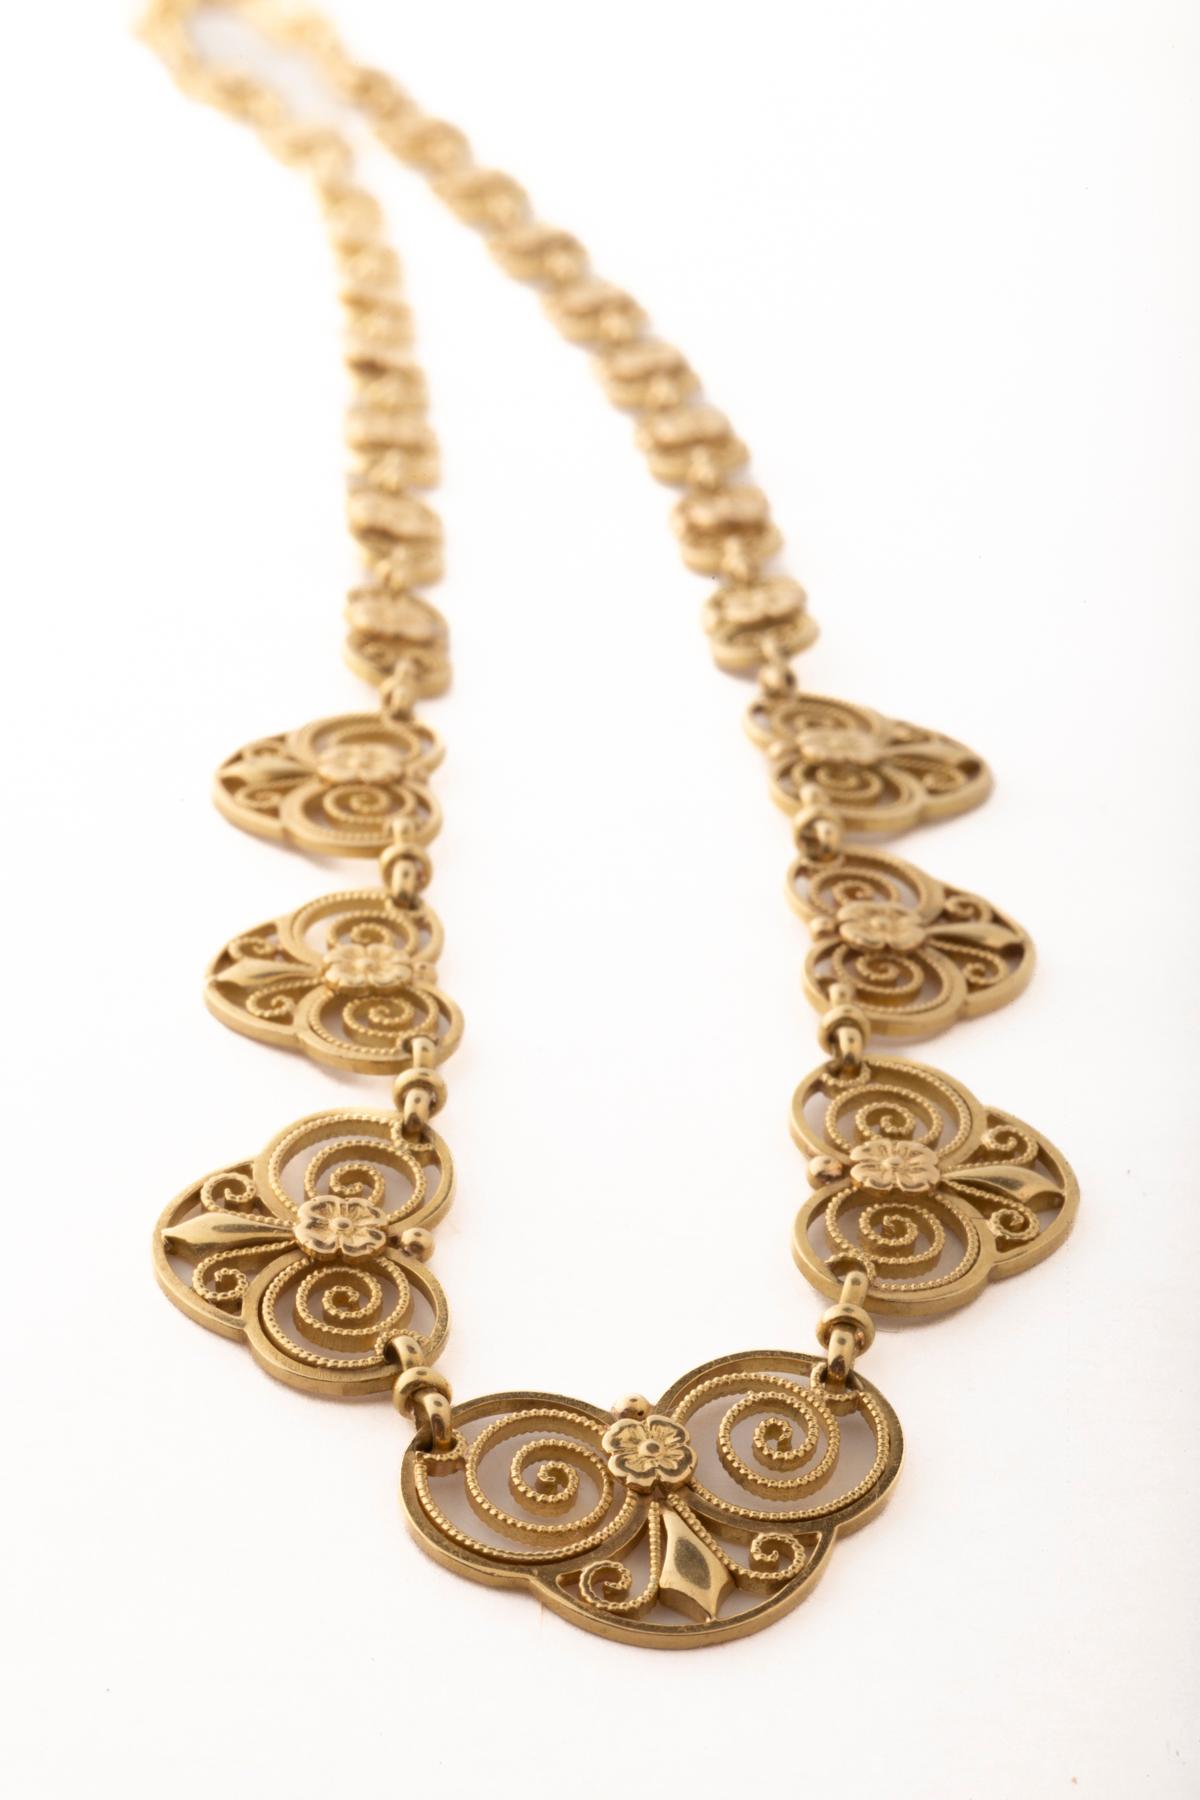 A very French necklace from the Art Nouveau period that is typical of French design of the era. It is graceful and lacy as its links graduate all around the neckline. French Art Nouveau jewelry took gold to new uses by creating flowing curvaceous